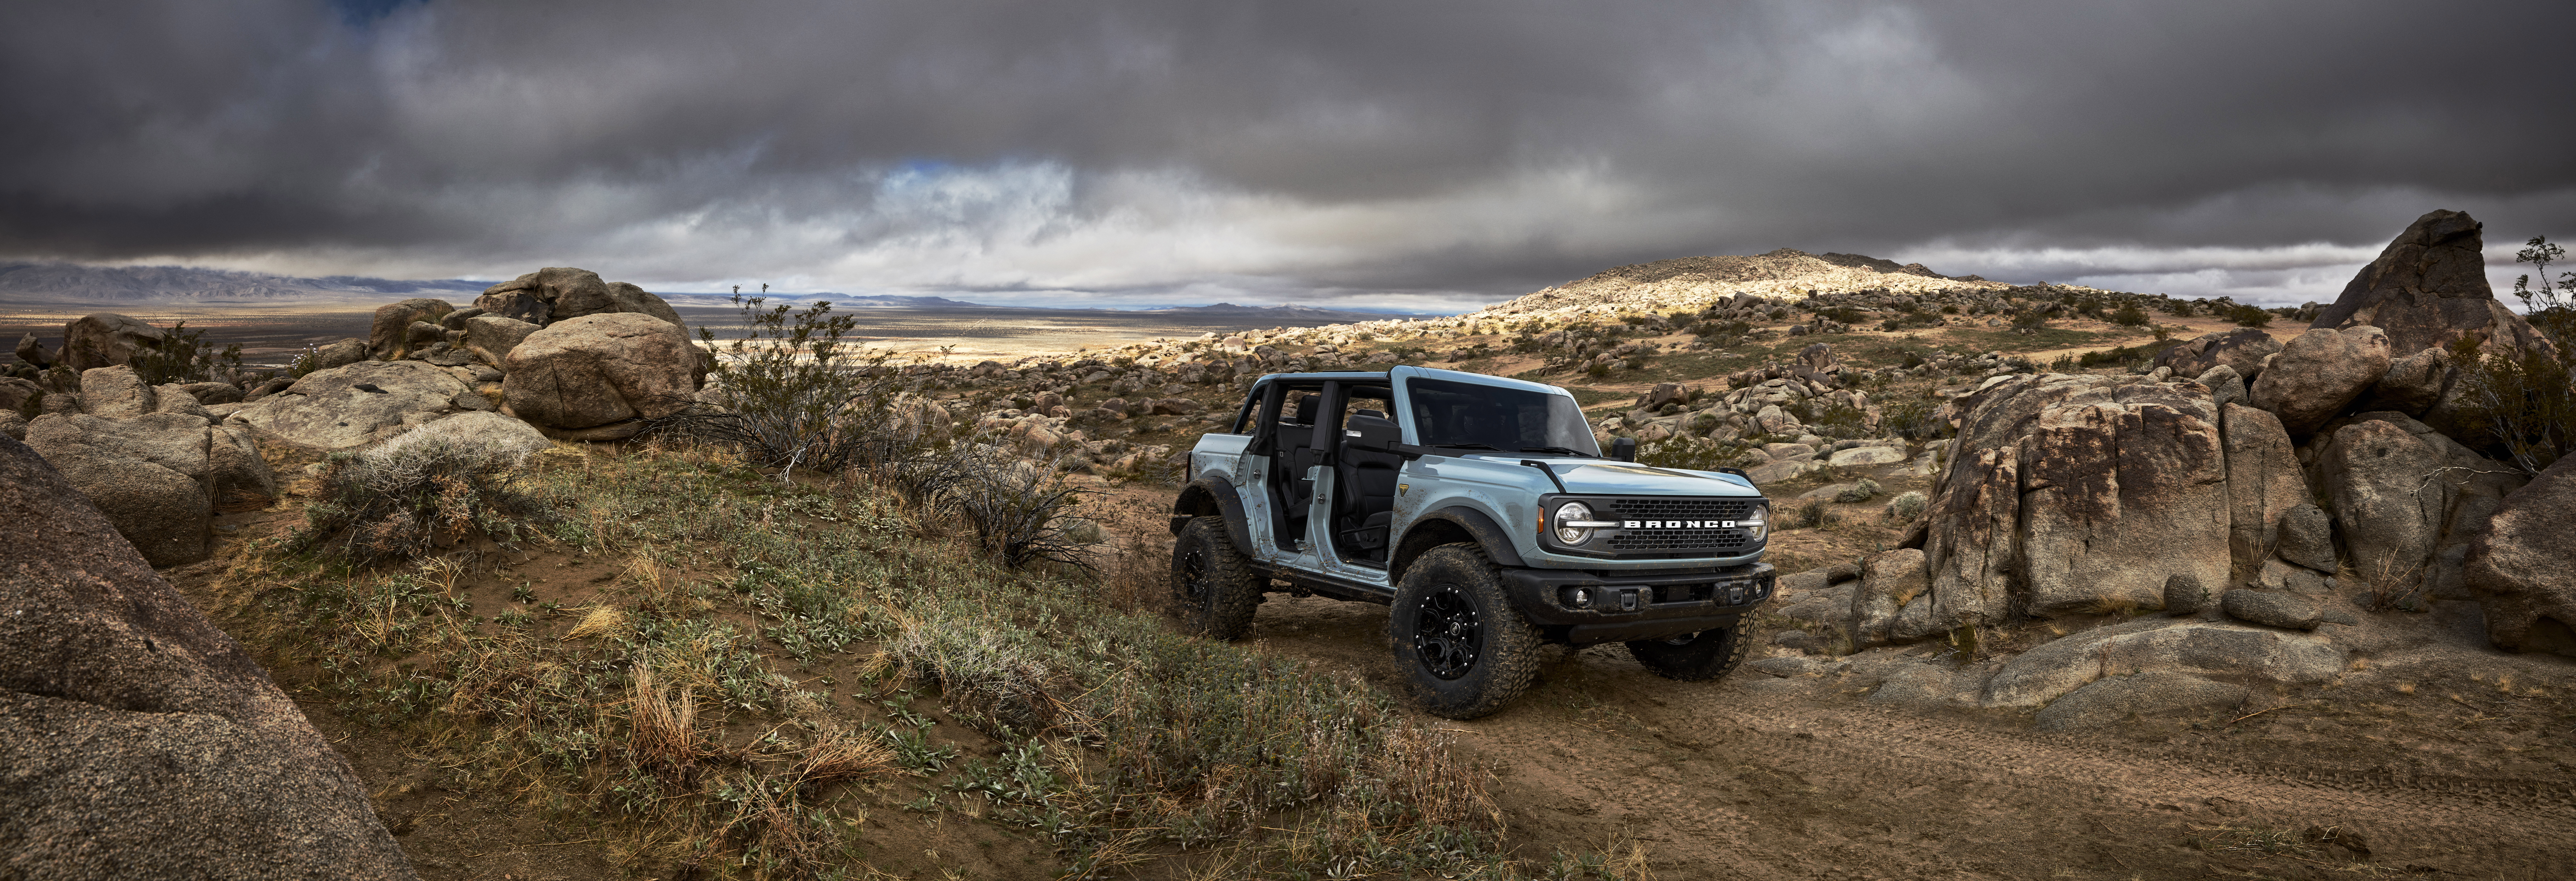 Sixth-generation Ford Bronco debuts – two EcoBoost petrols, removable panels and washable interior Image #1145171